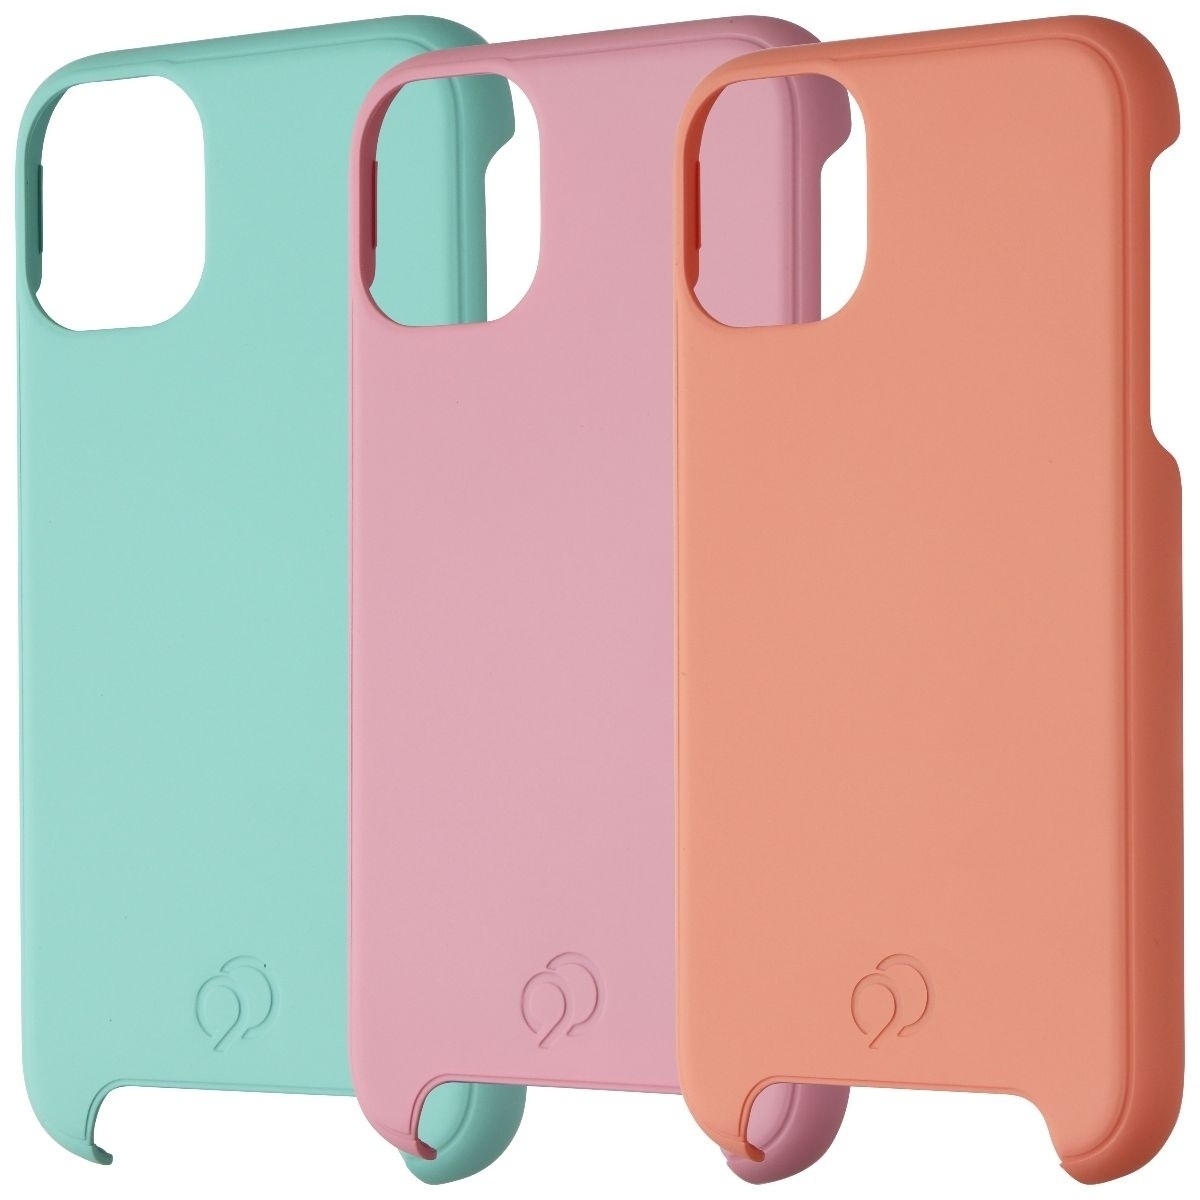 Nimbus9 Cirrus 2 LifeStyle Kit Case For Apple IPhone 11 - Tropical Collection